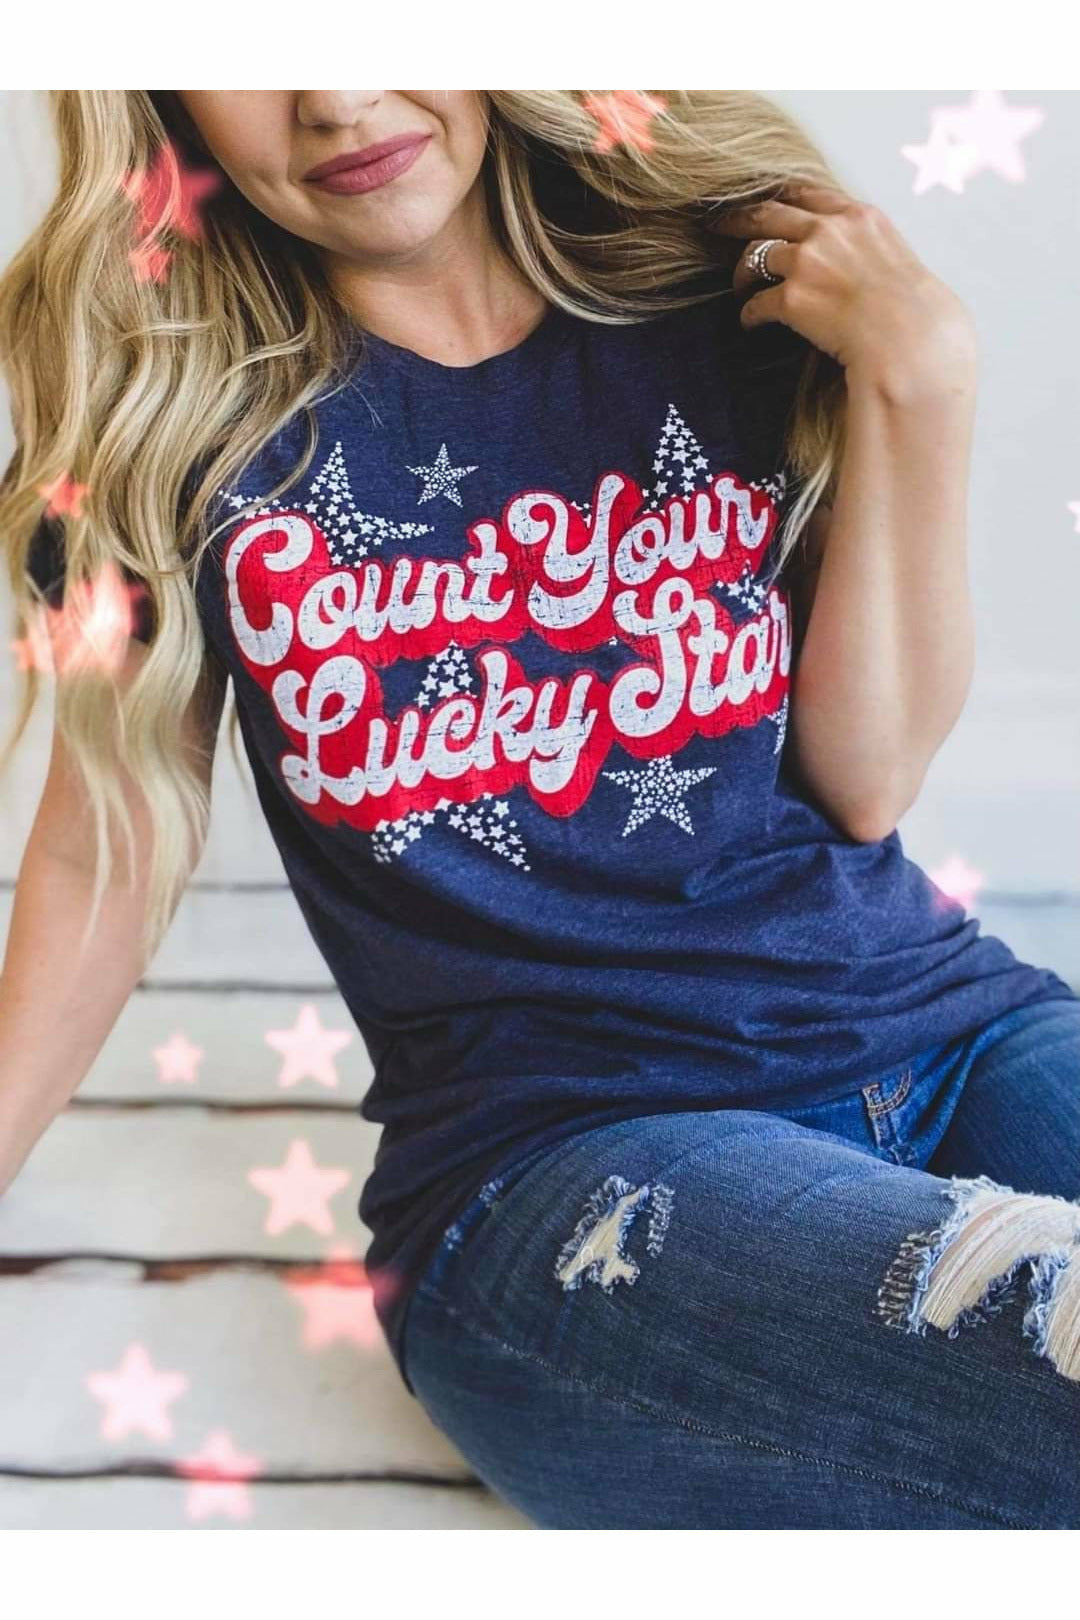 Count Your Lucky Stars Tee